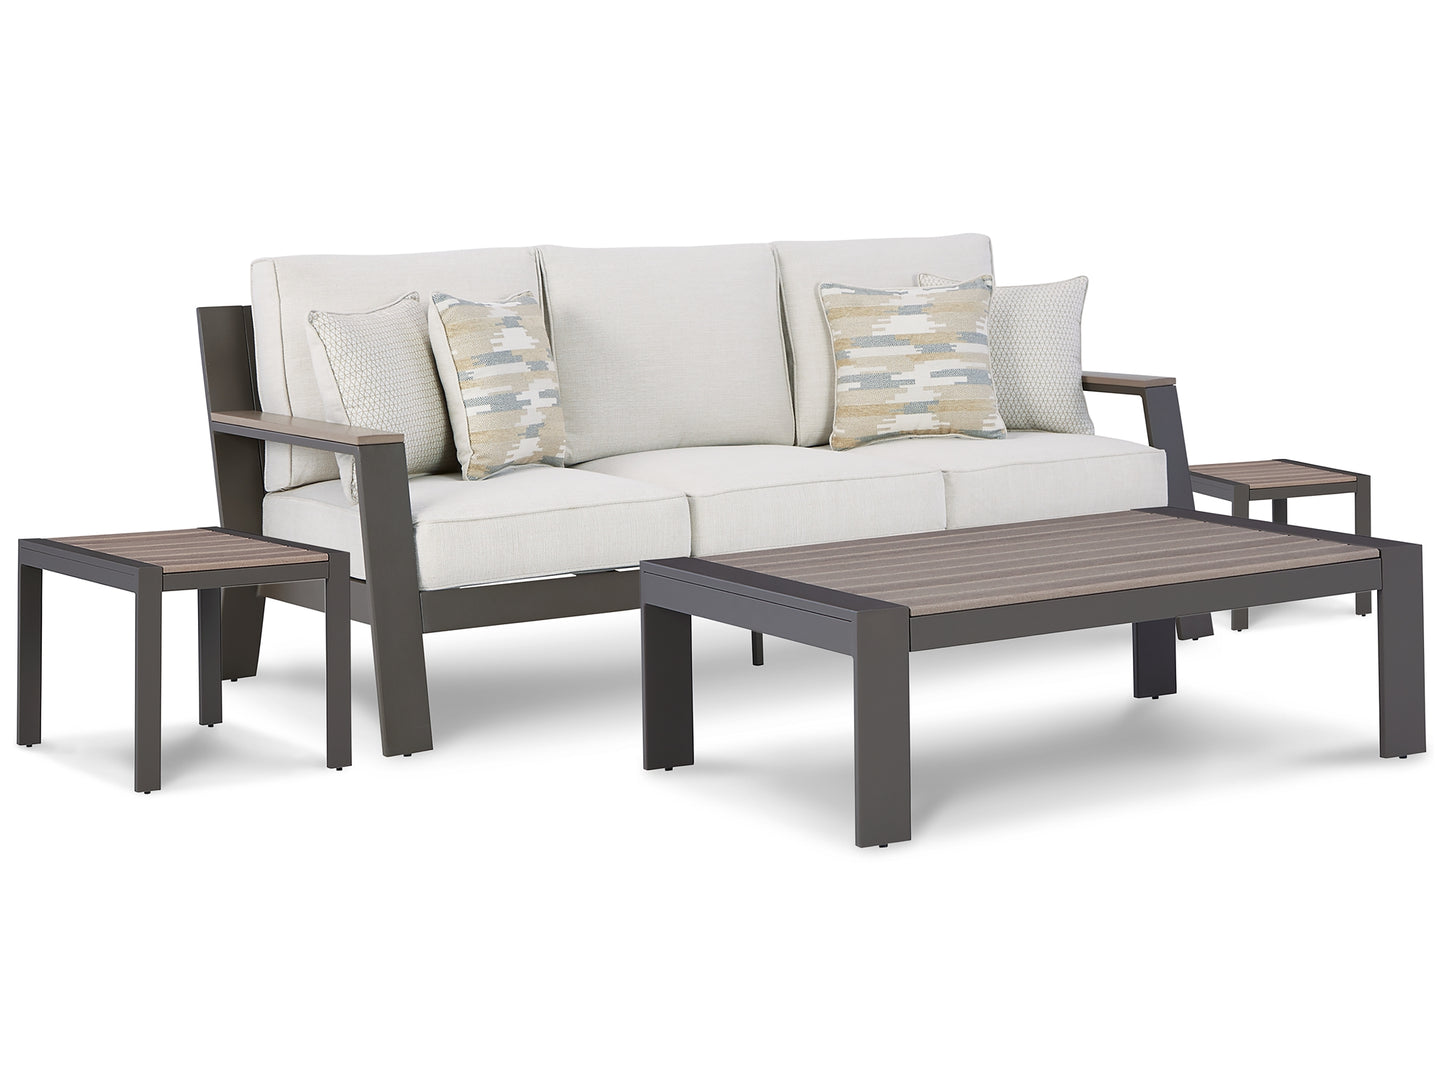 Tropicava Outdoor Sofa with Coffee Table and 2 End Tables Wilson Furniture (OH)  in Bridgeport, Ohio. Serving Moundsville, Richmond, Smithfield, Cadiz, & St. Clairesville